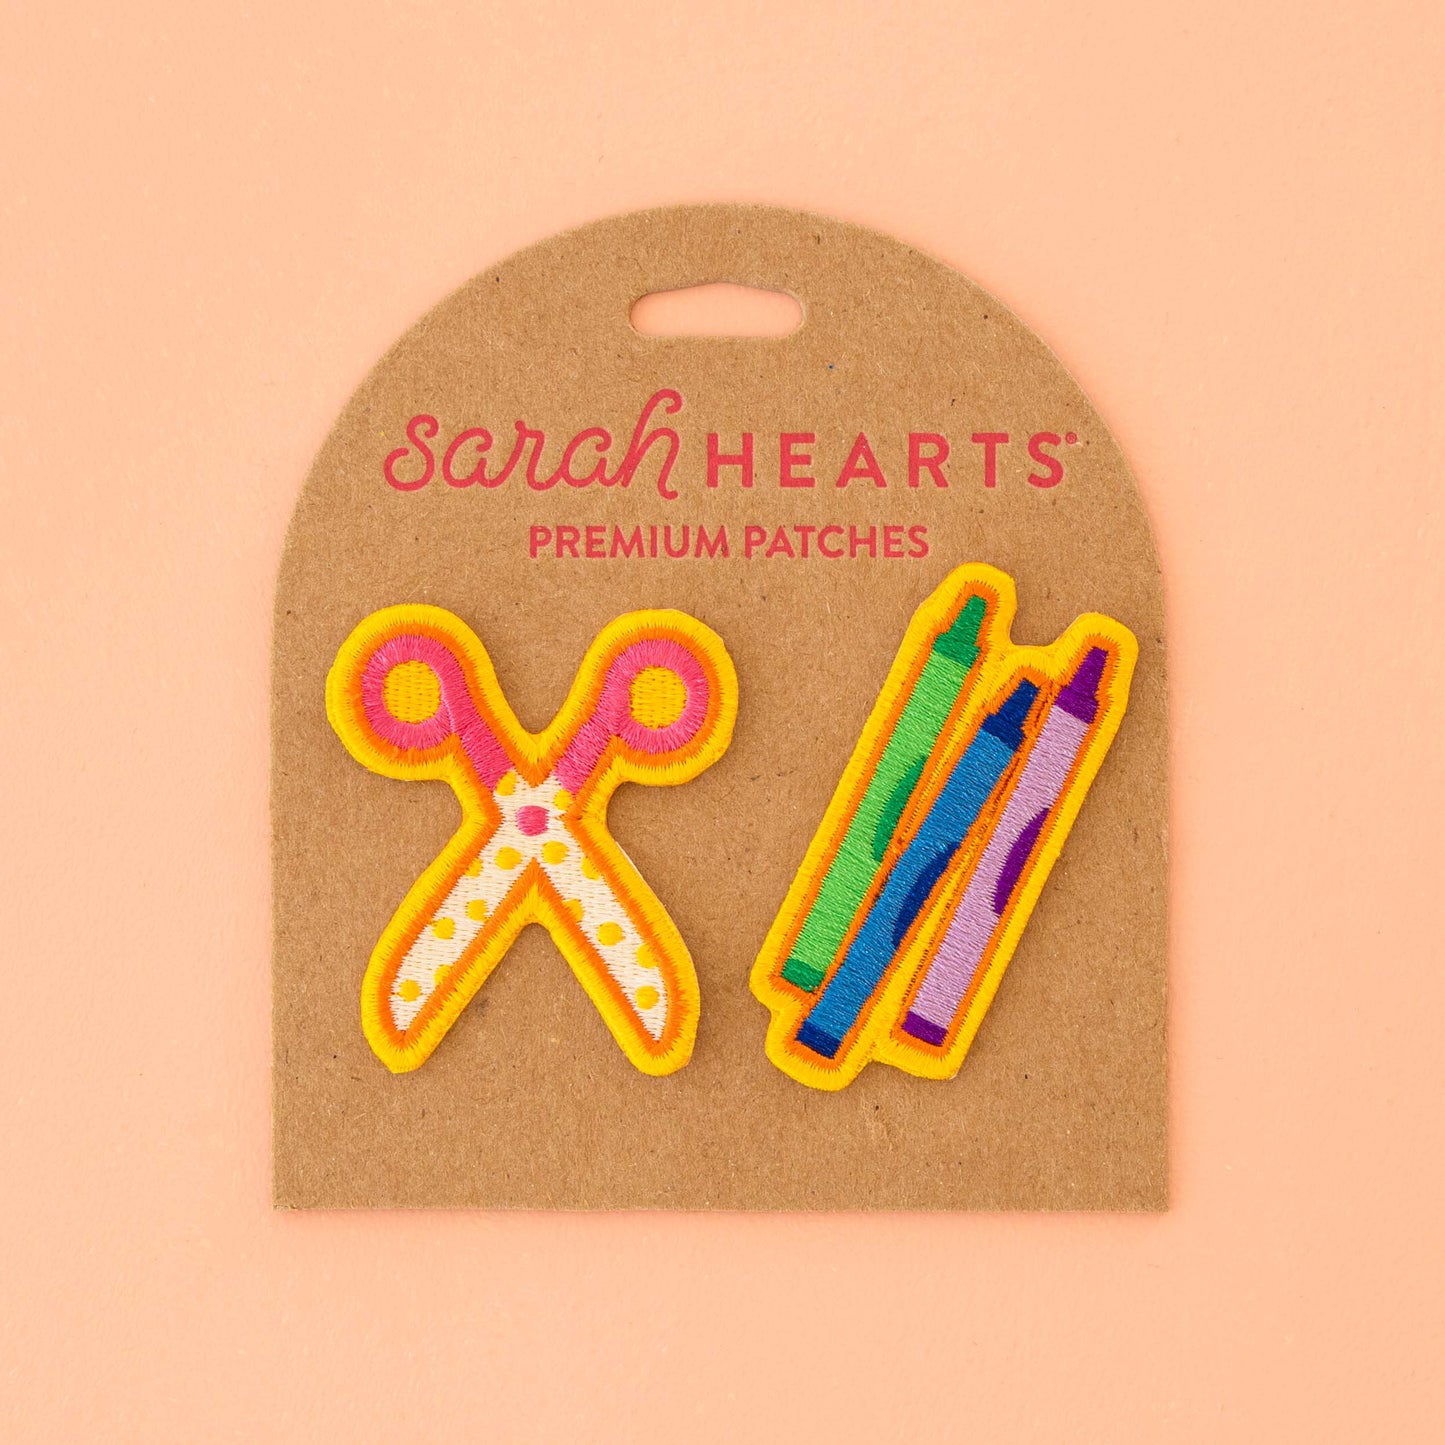 Scissors and Crayons Embroidered Patches - 2 Pack